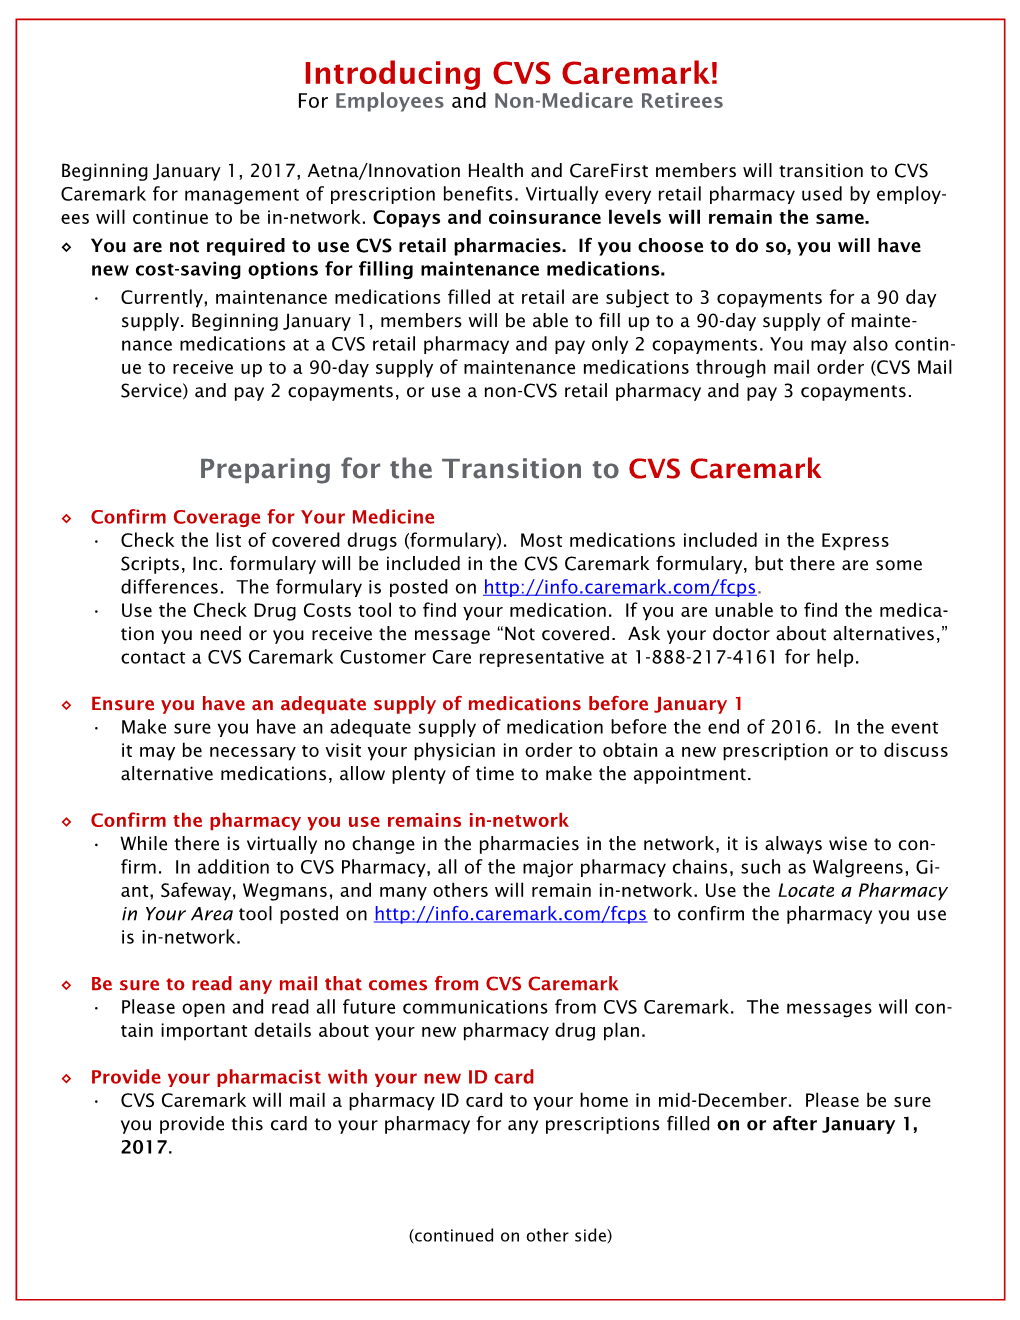 Introducing CVS Caremark! for Employees and Non-Medicare Retirees